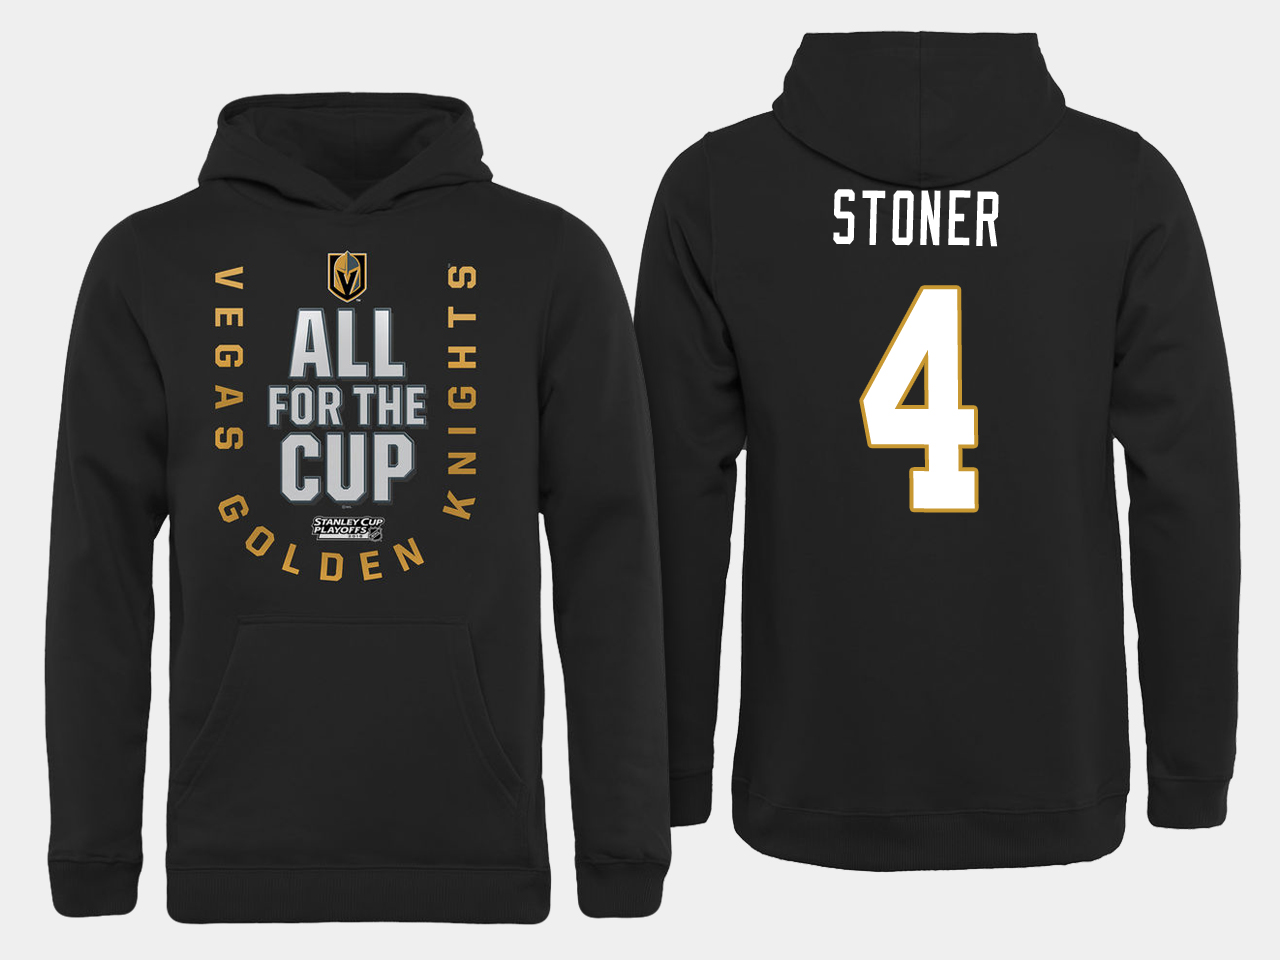 Men NHL Vegas Golden Knights #4 Stoner All for the Cup hoodie->more nhl jerseys->NHL Jersey